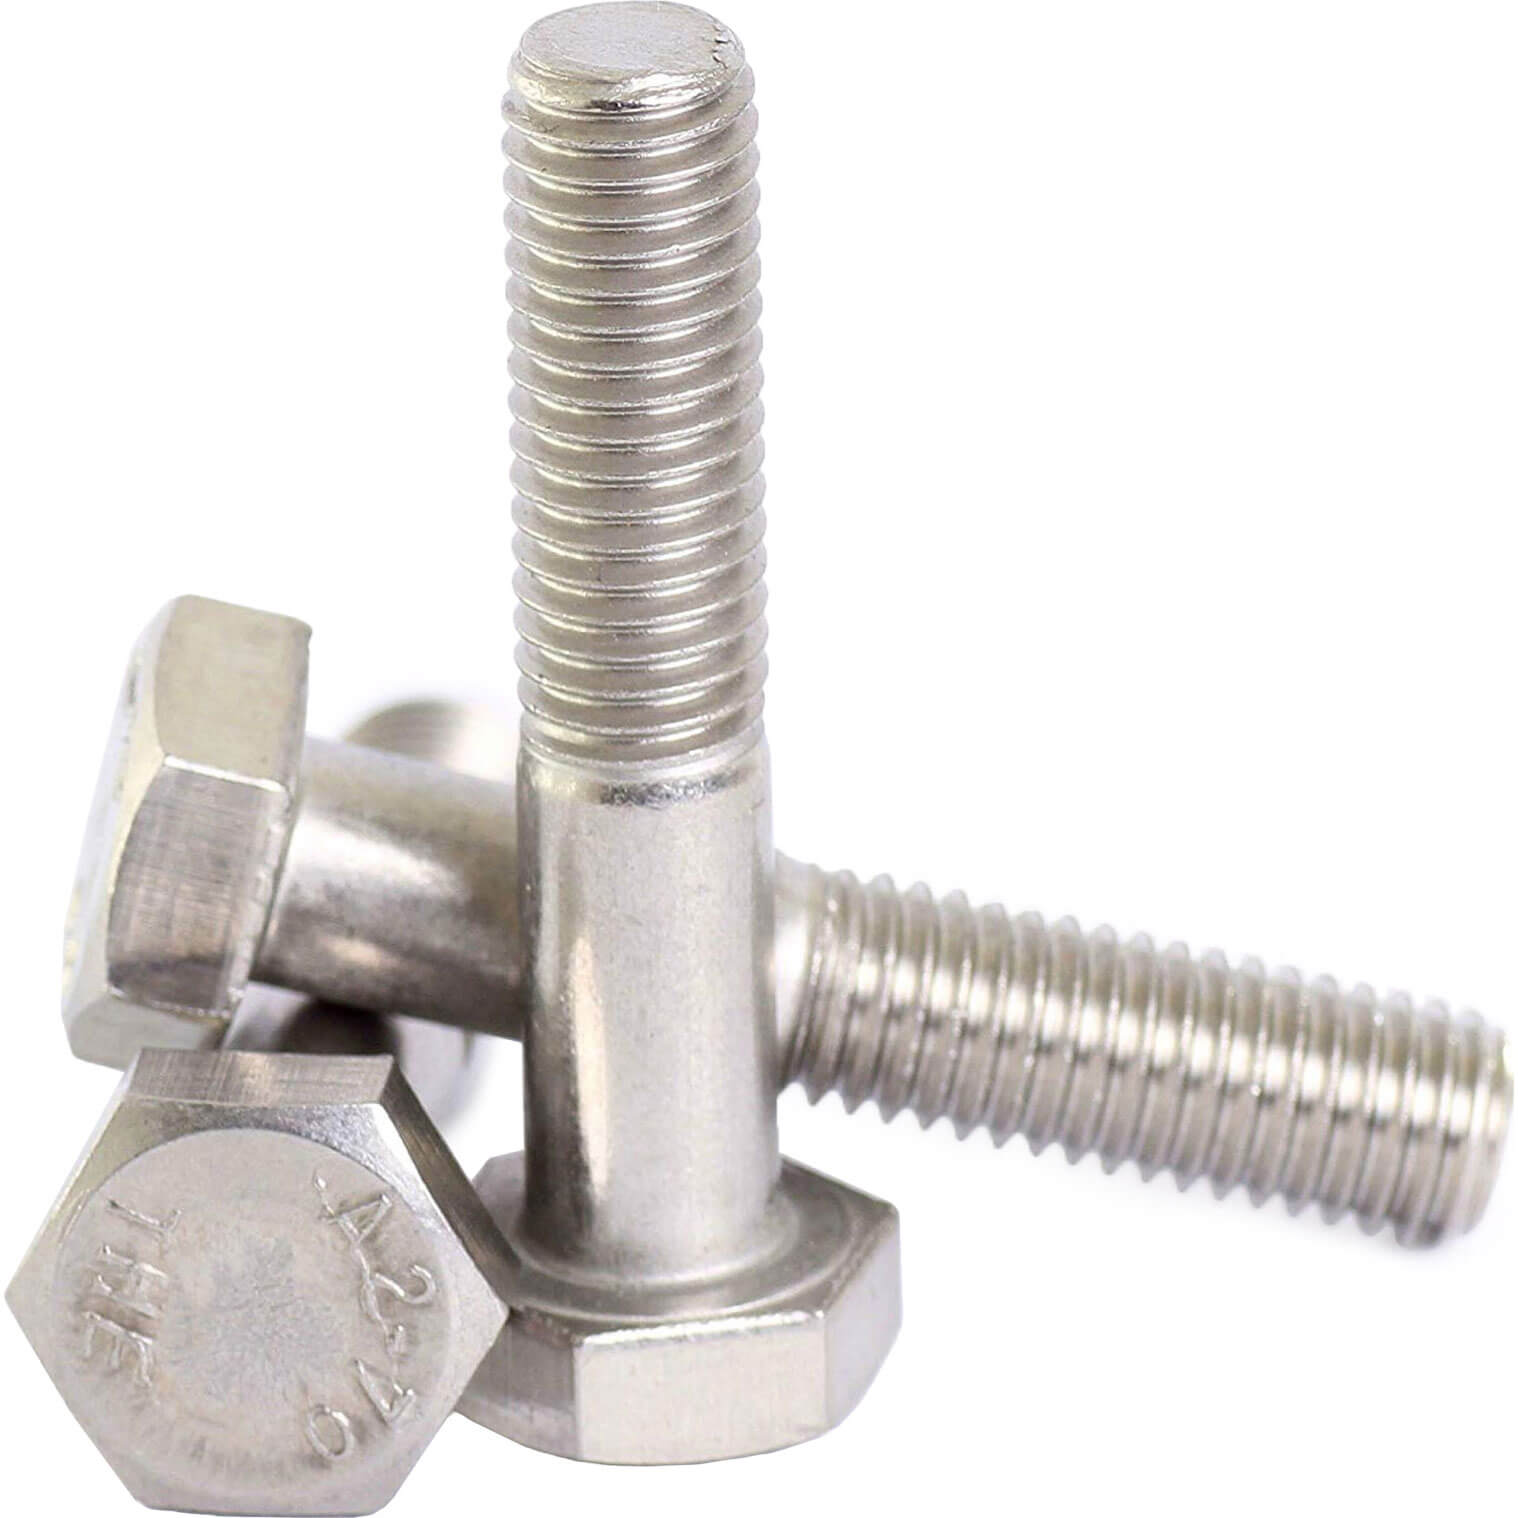 Photos - Nail / Screw / Fastener Sirius Bolts A2 304 Stainless Steel M6 90mm Pack of 1 